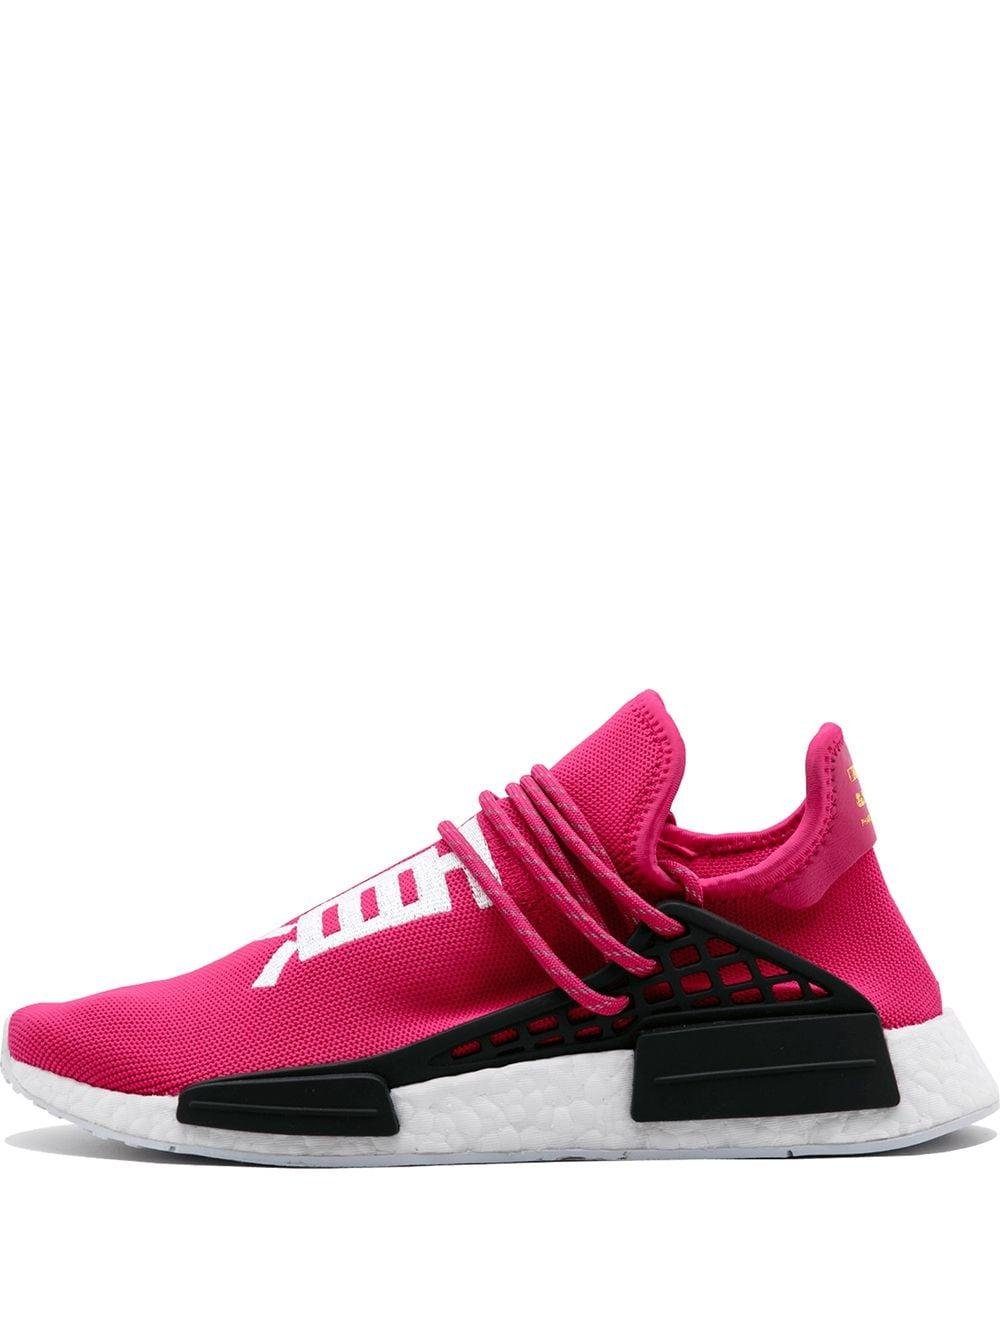 adidas Pharrell Williams Race Nmd in for Men - Lyst